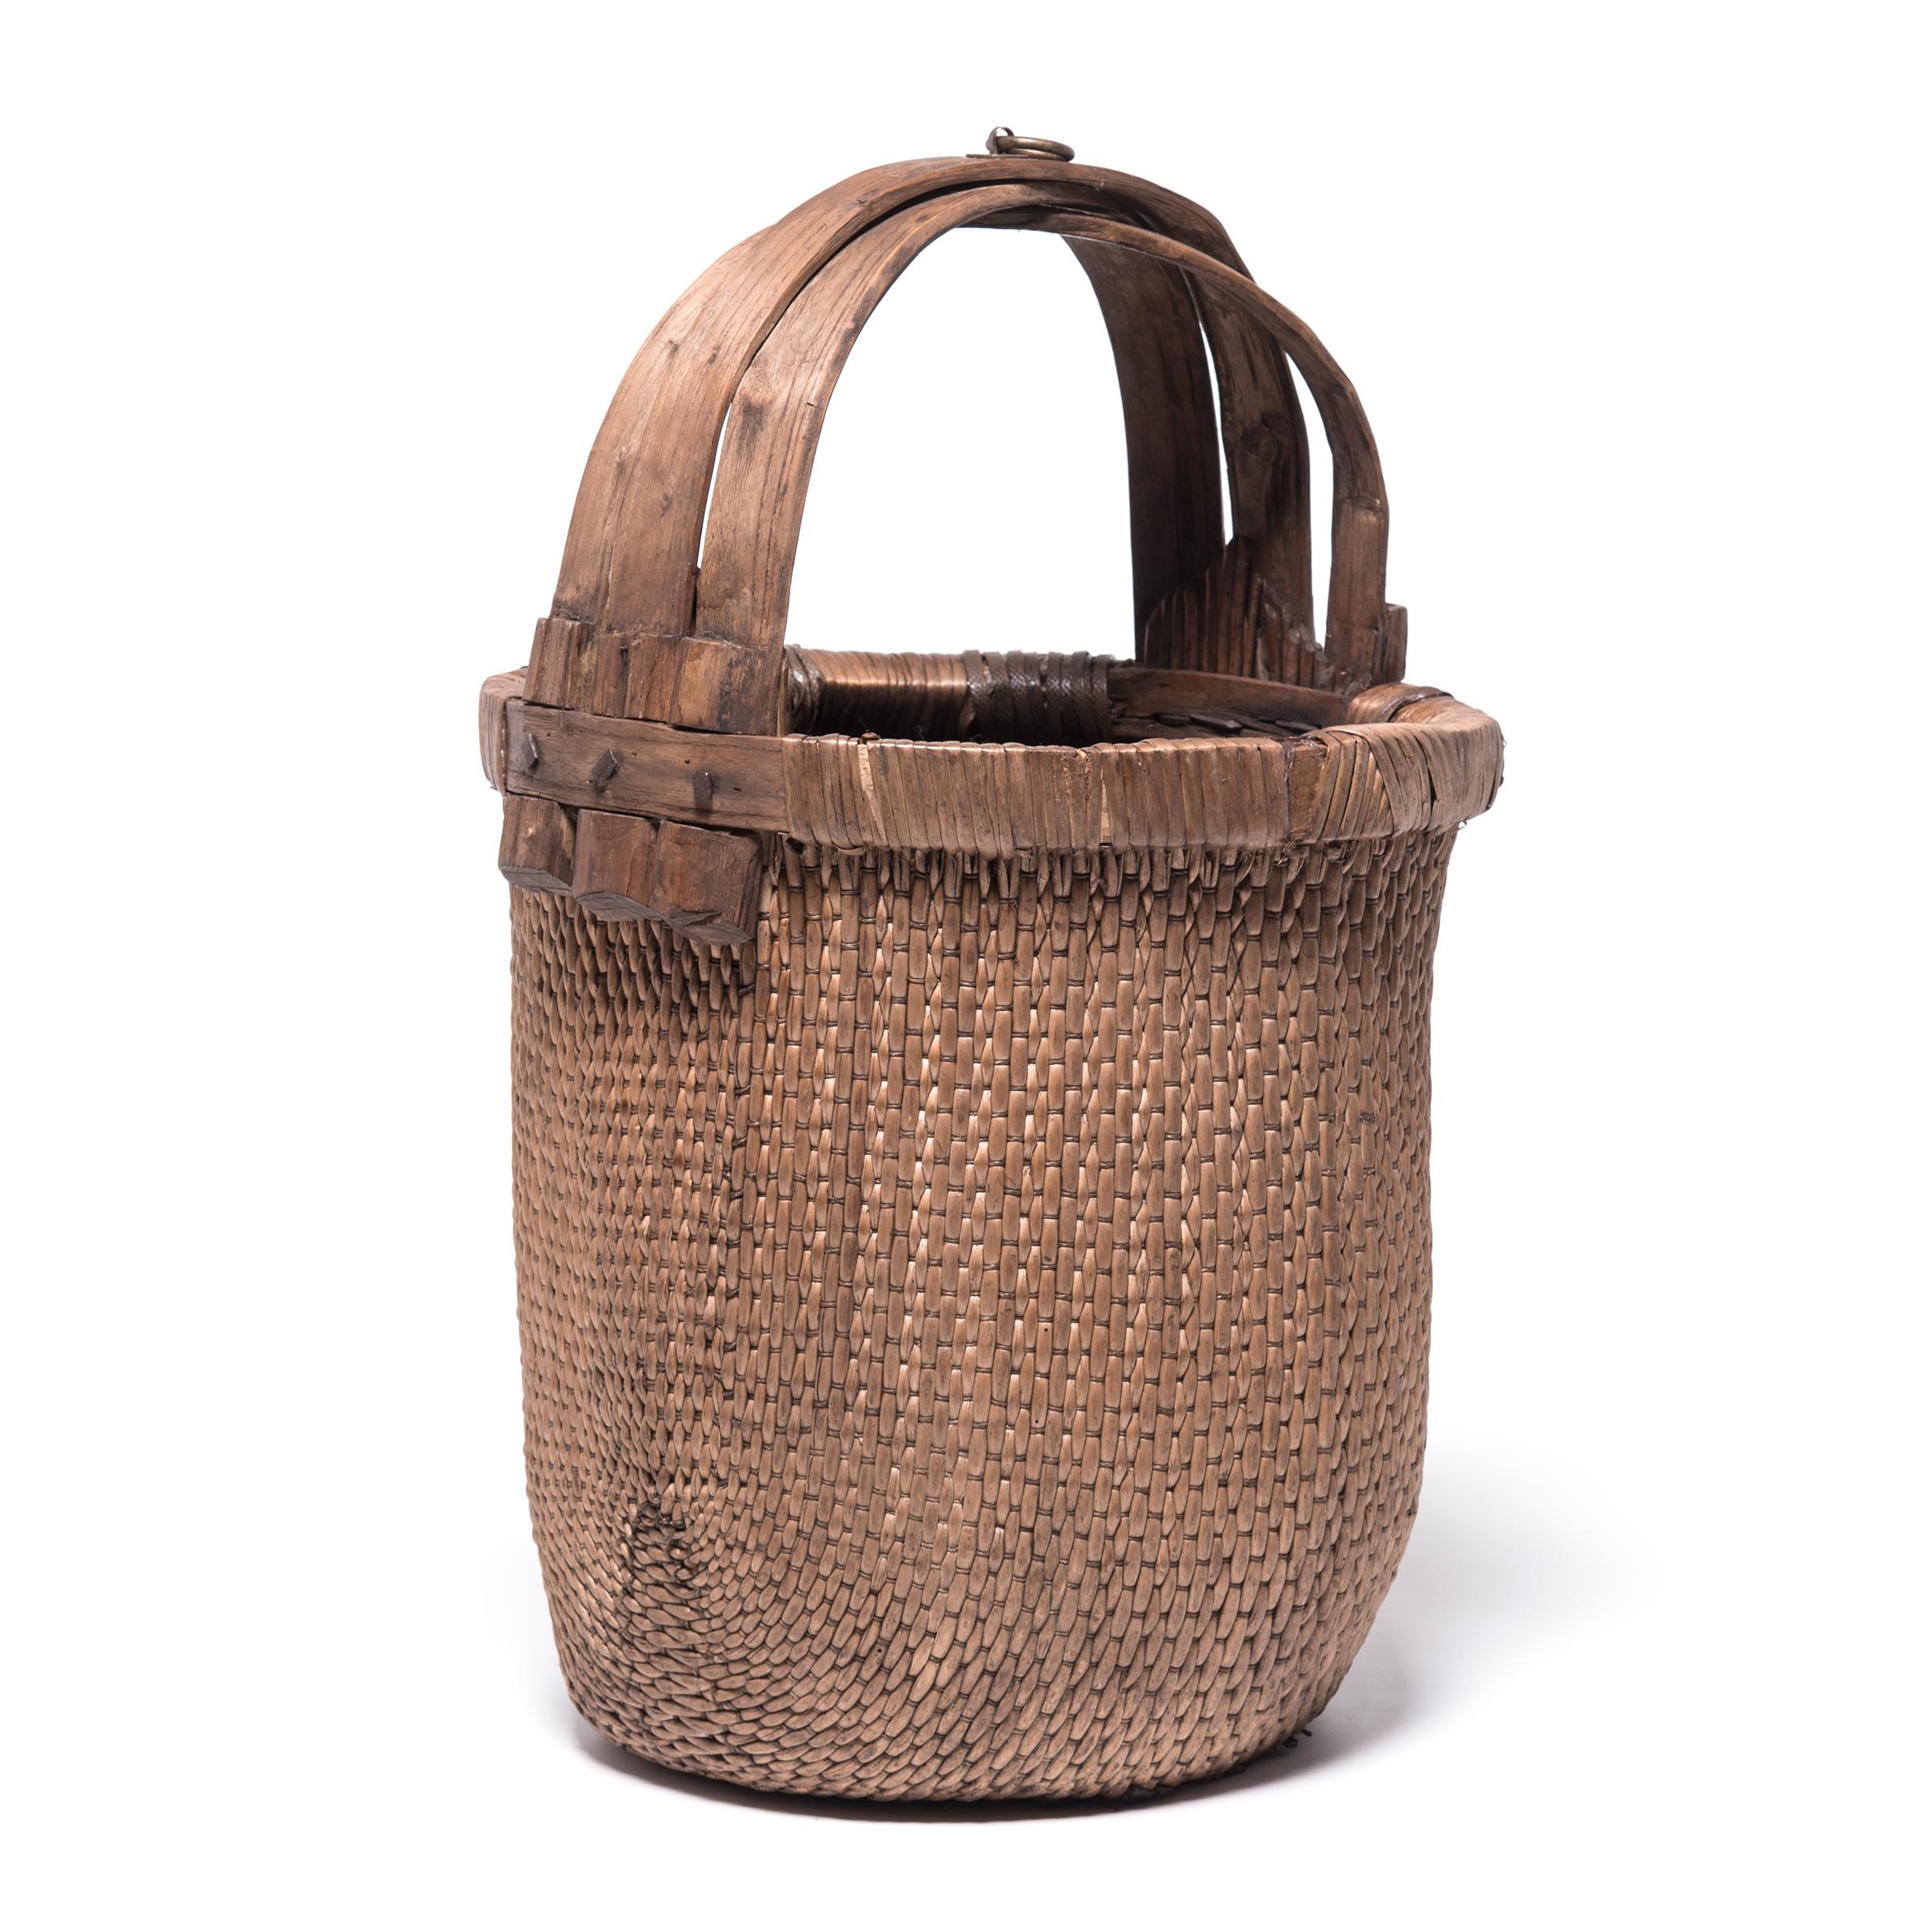 Basket making is an ancient and humble craft, but in the hands of a skilled weaver a simple willow basket becomes a truly beautiful statement. The artisan’s mastery is evident in this early 20th century bent handle basket: the strong, flexible